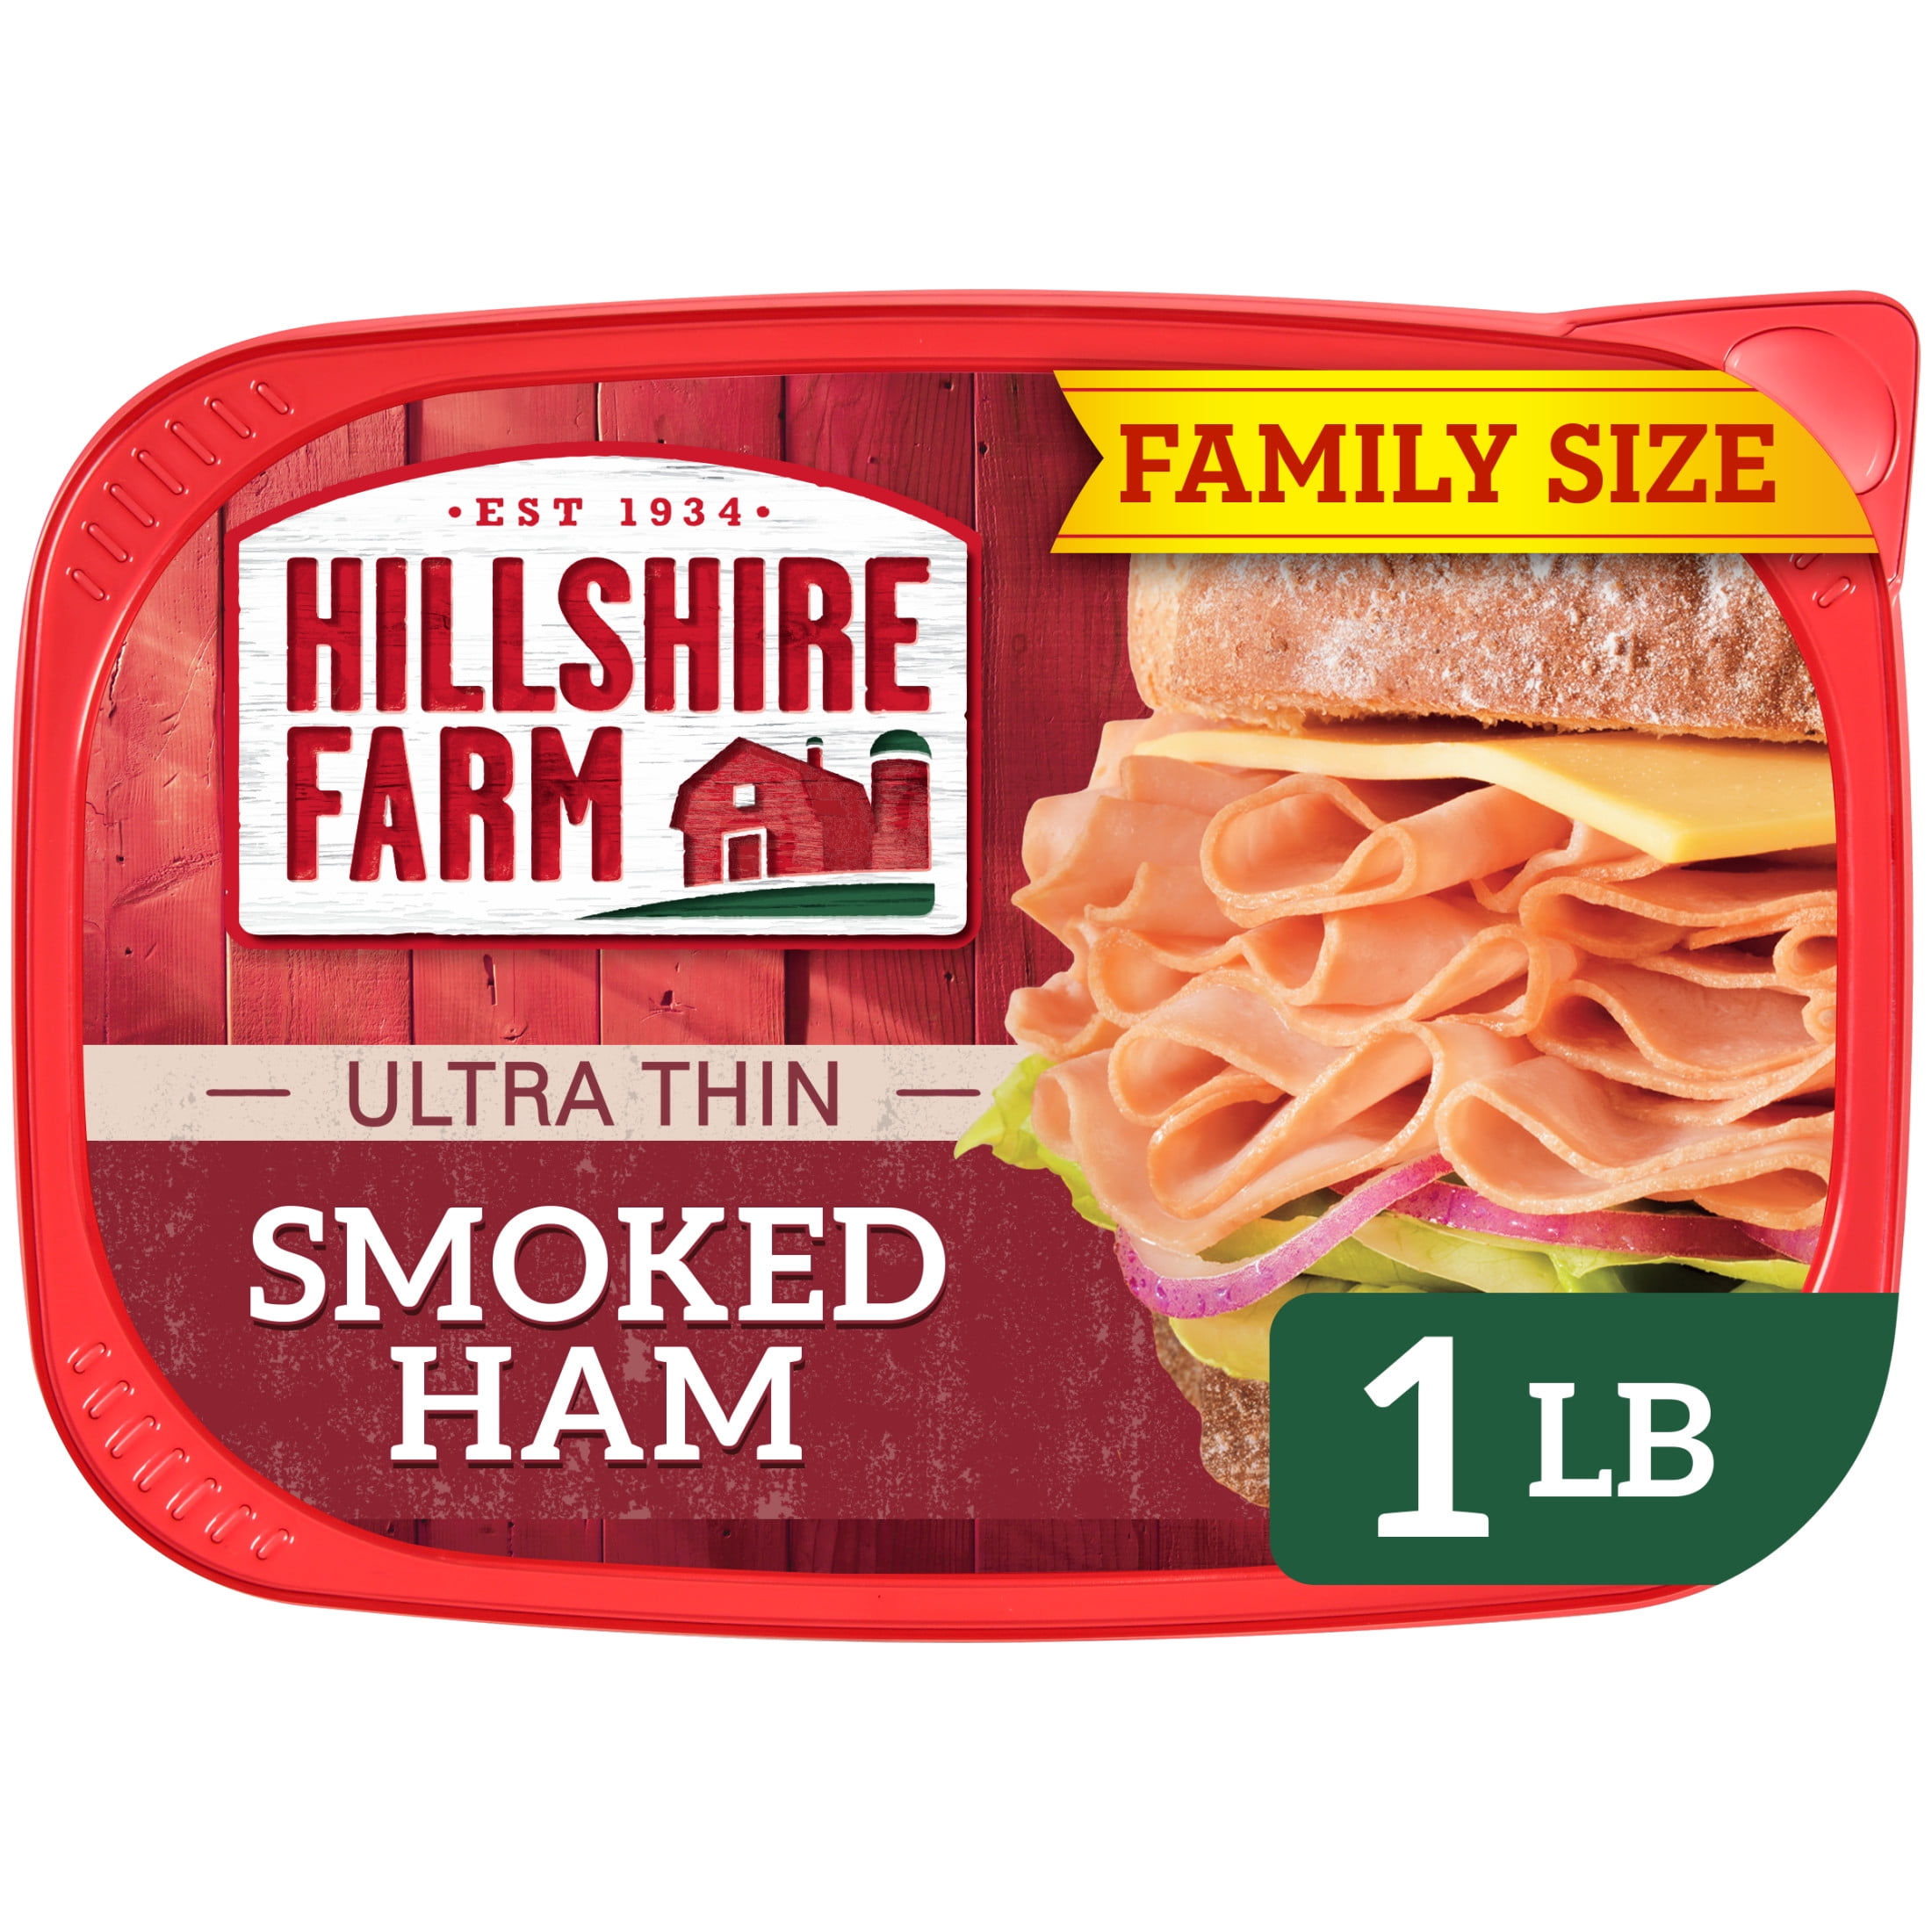 containers of Hillshire Farms packaged sliced sandwich meat on the  refrigerator shelves of a grocery store Stock Photo - Alamy